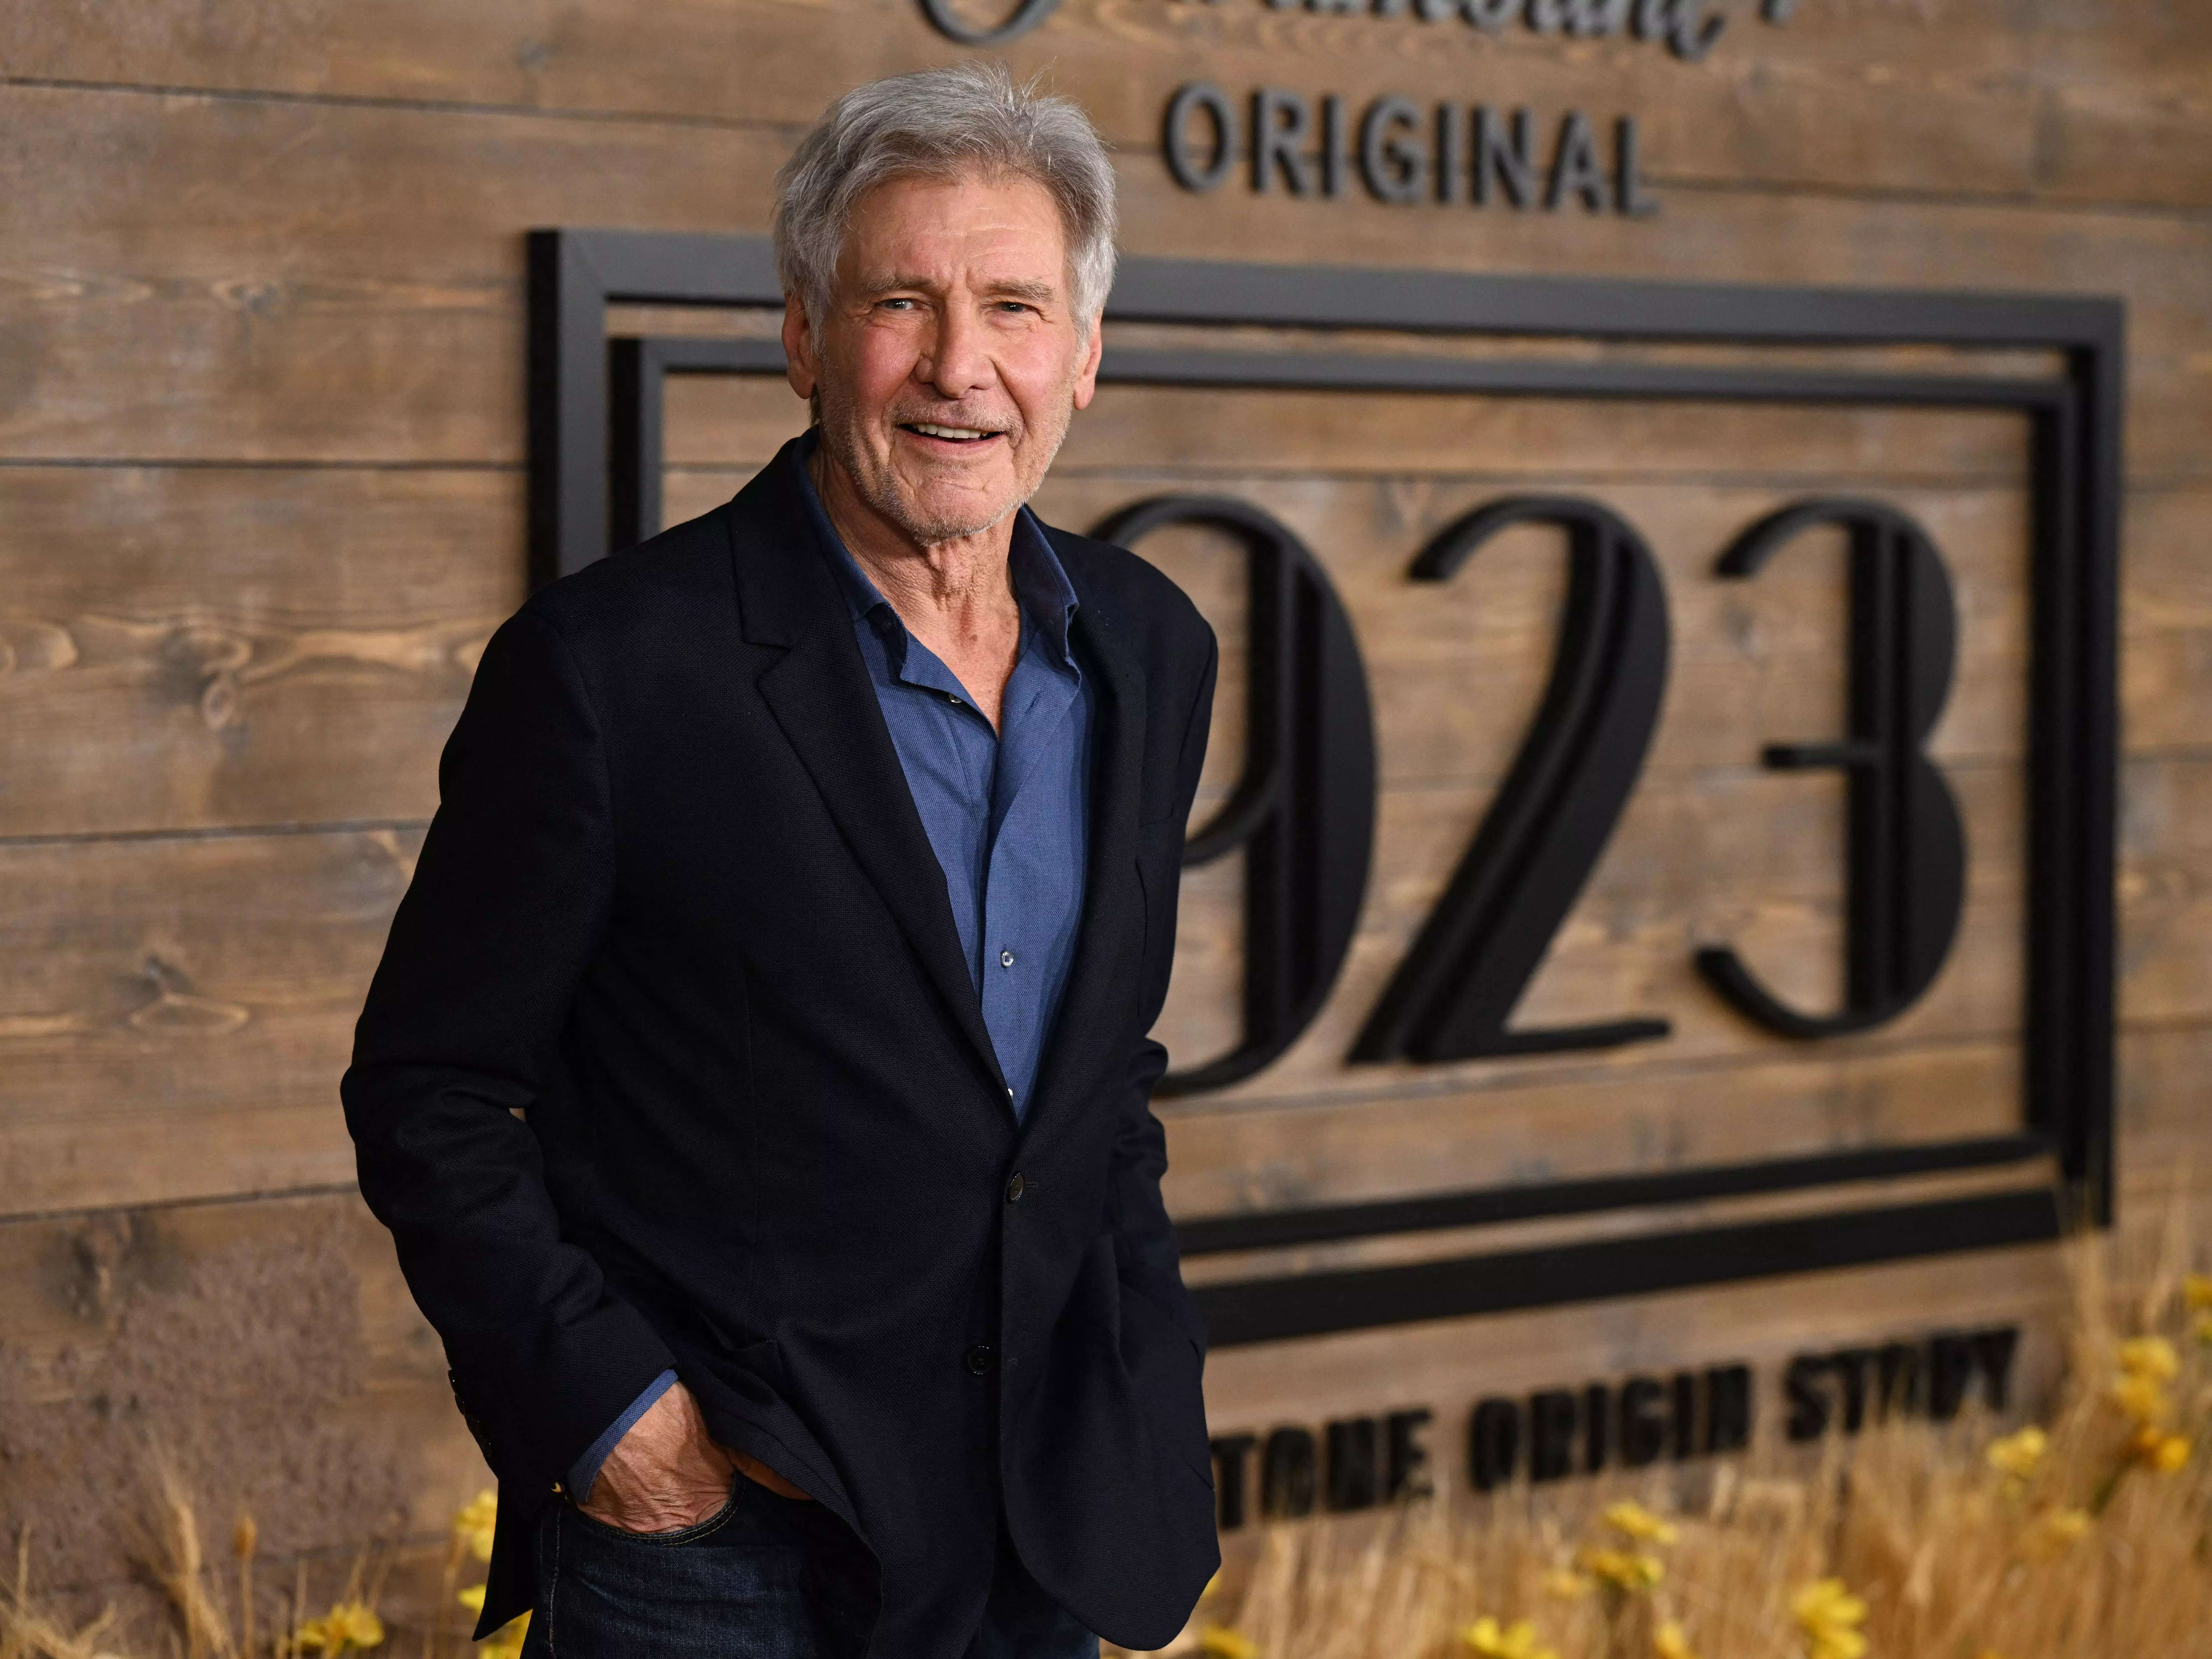 Harrison Ford attends the Paramount+ series "1923" premiere on December 2, 2022.